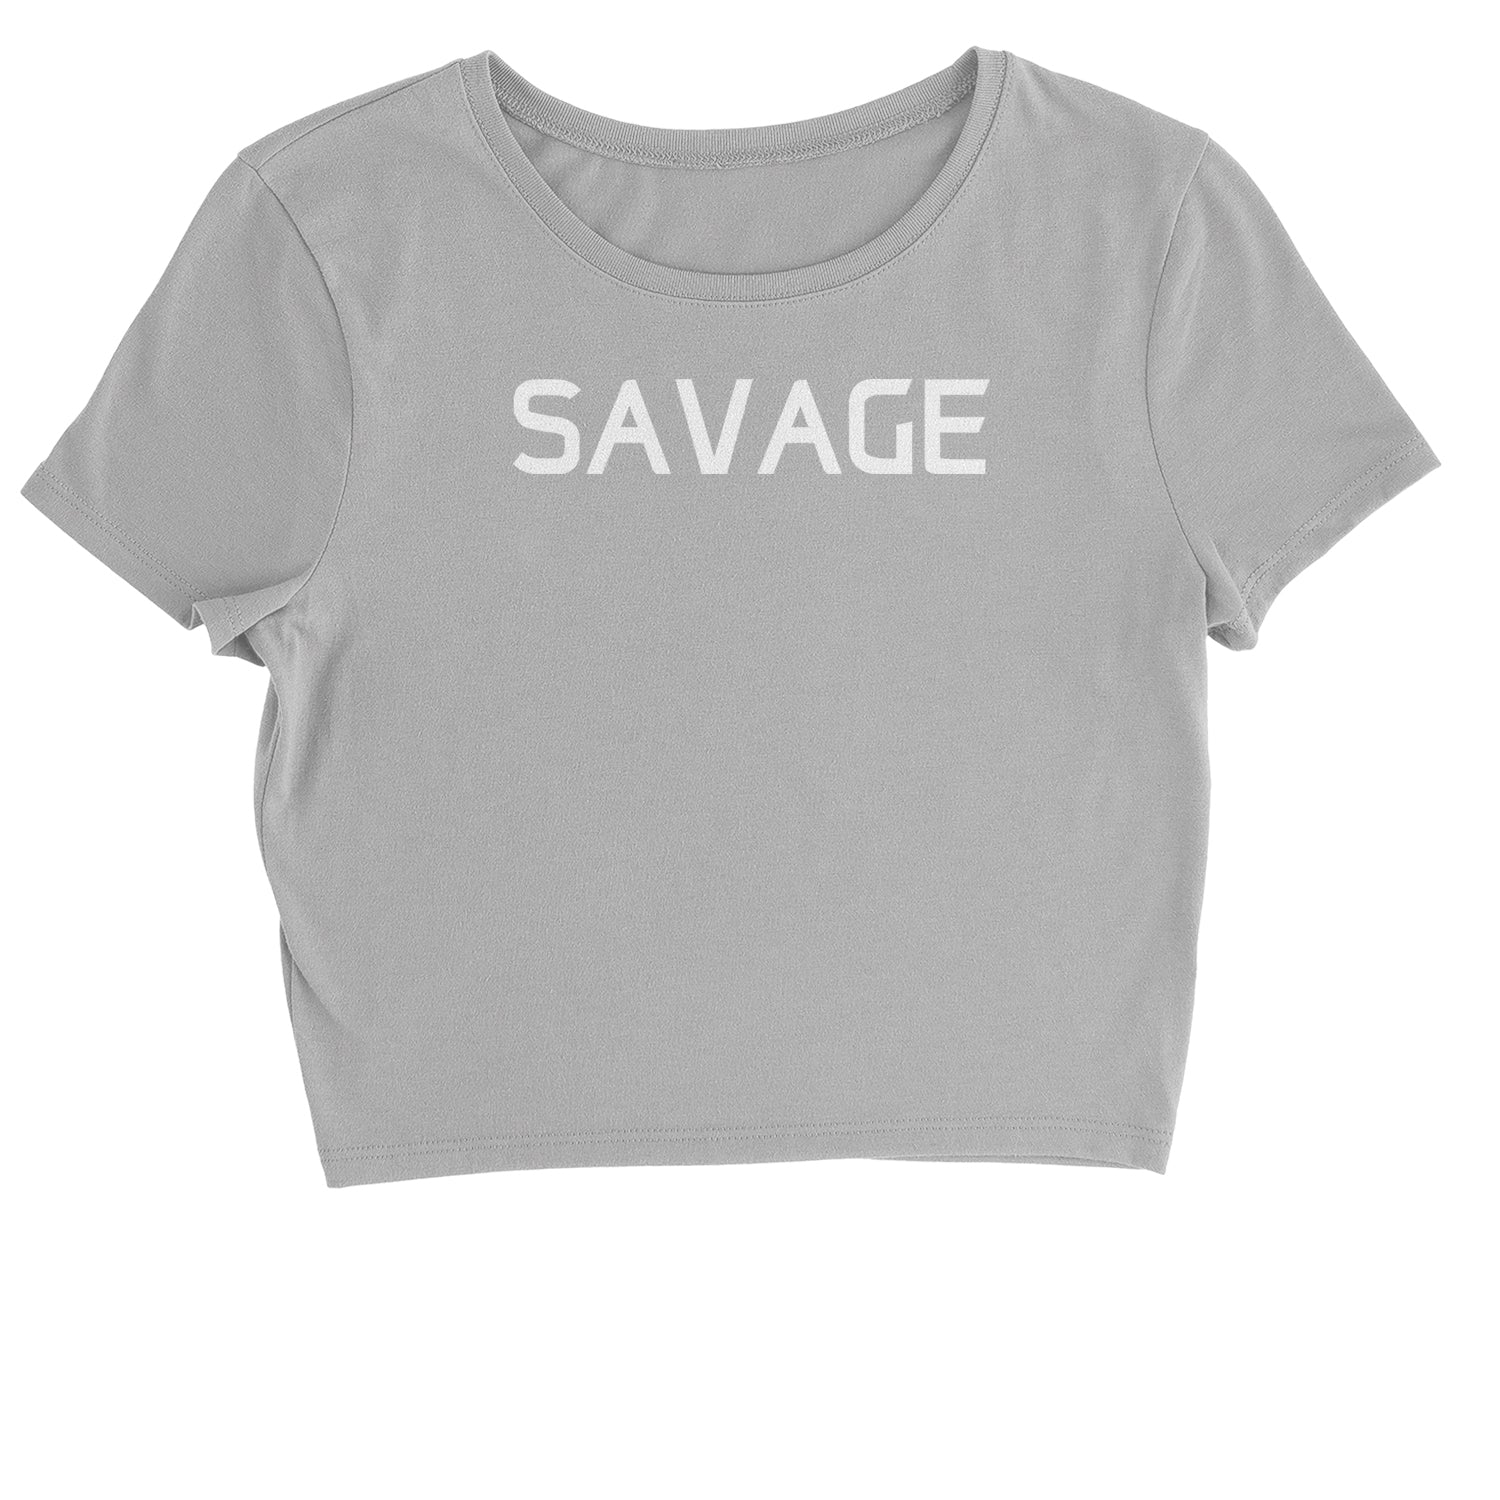 Savage Cropped T-Shirt #expressiontees by Expression Tees